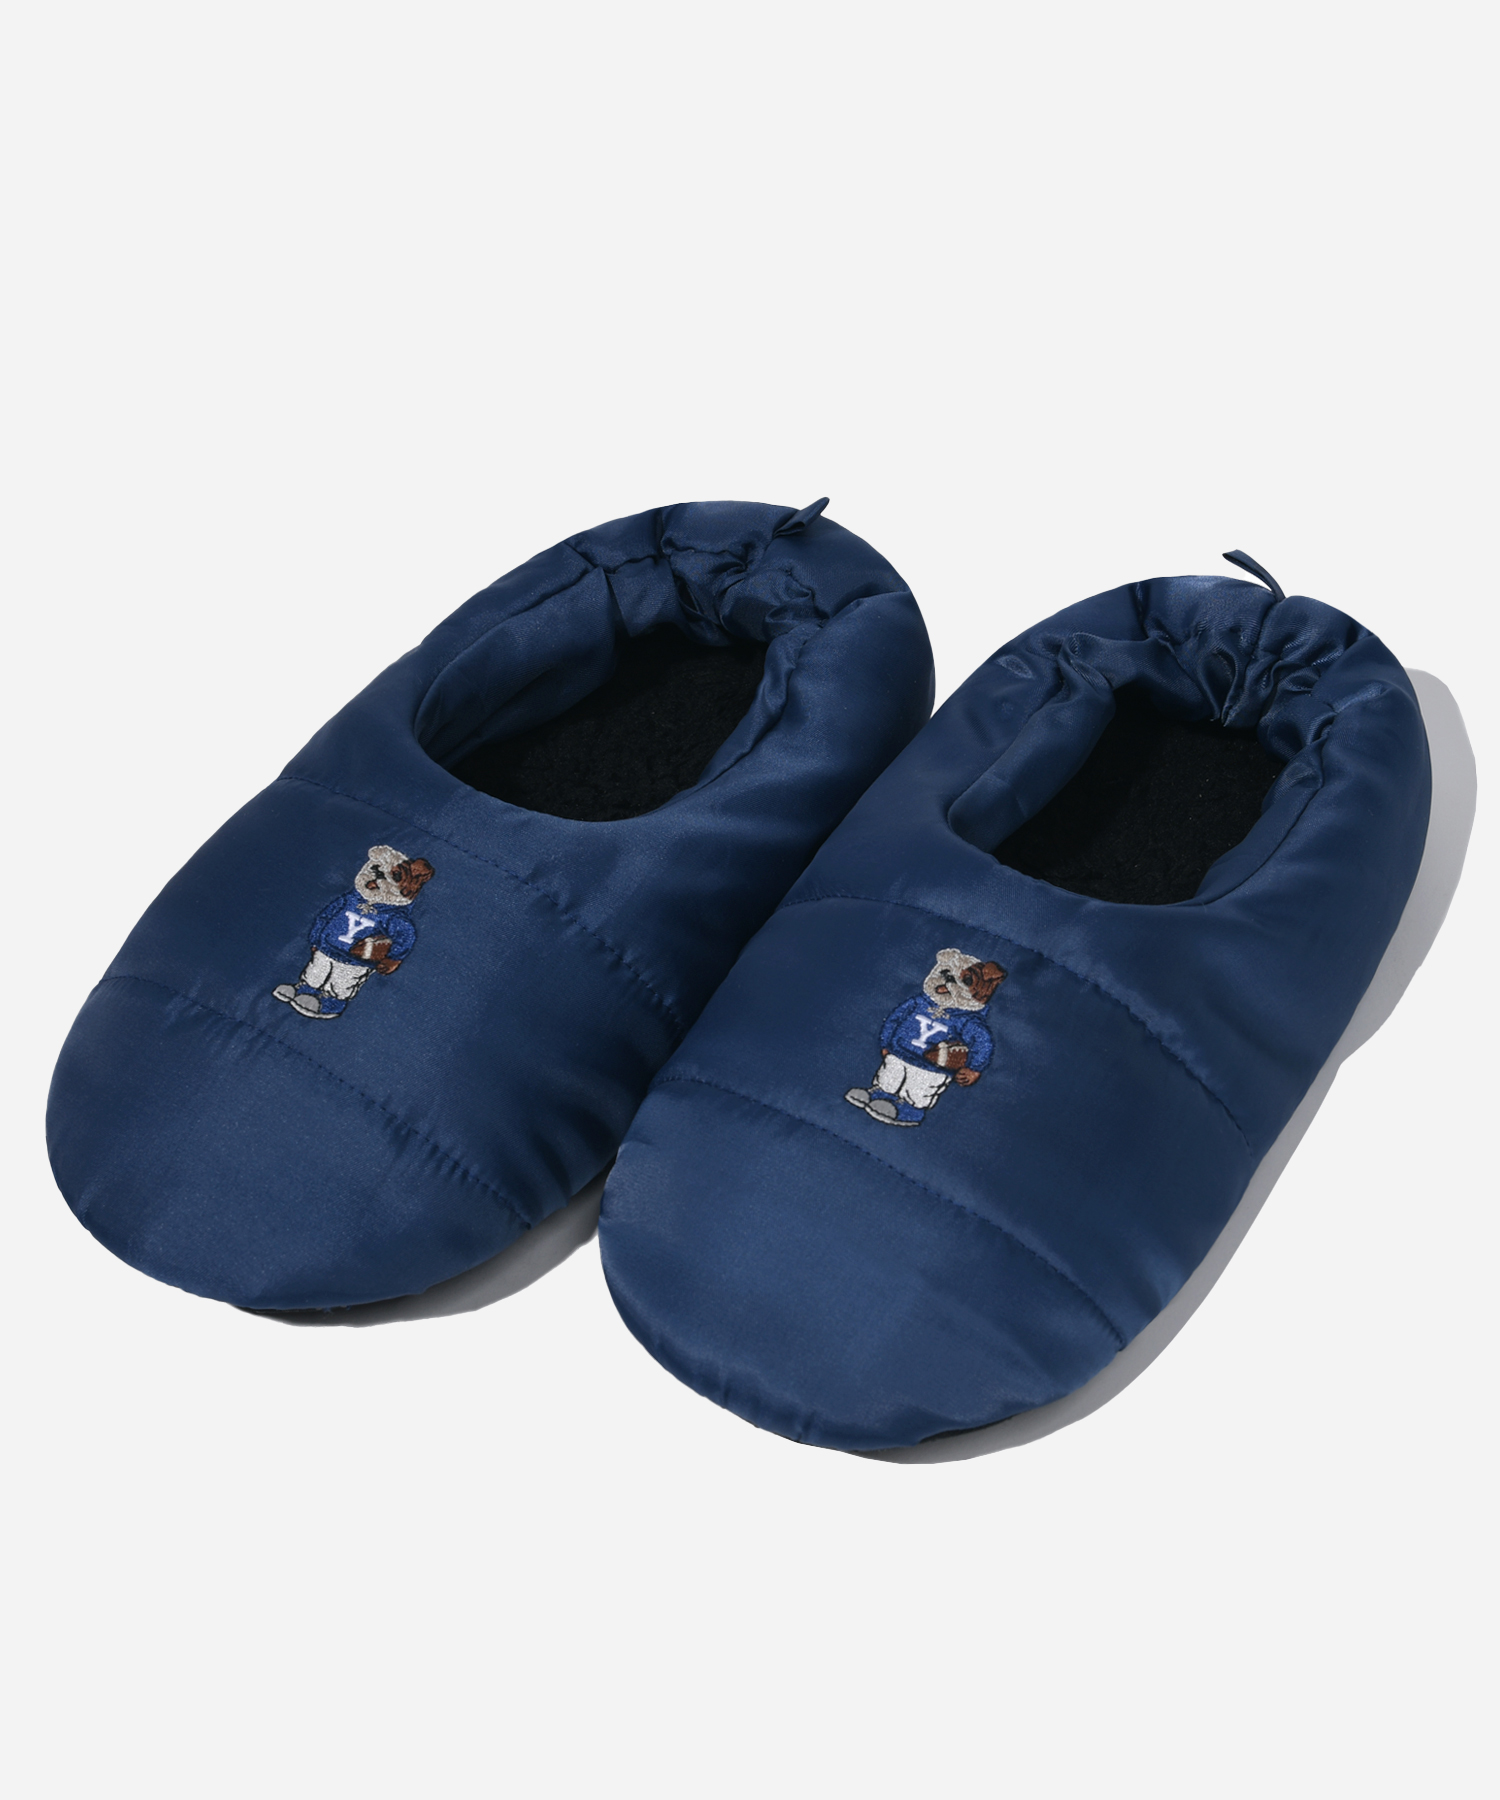 EMBROIDERY DAN PADDED LOUNGE SHOES NAVY